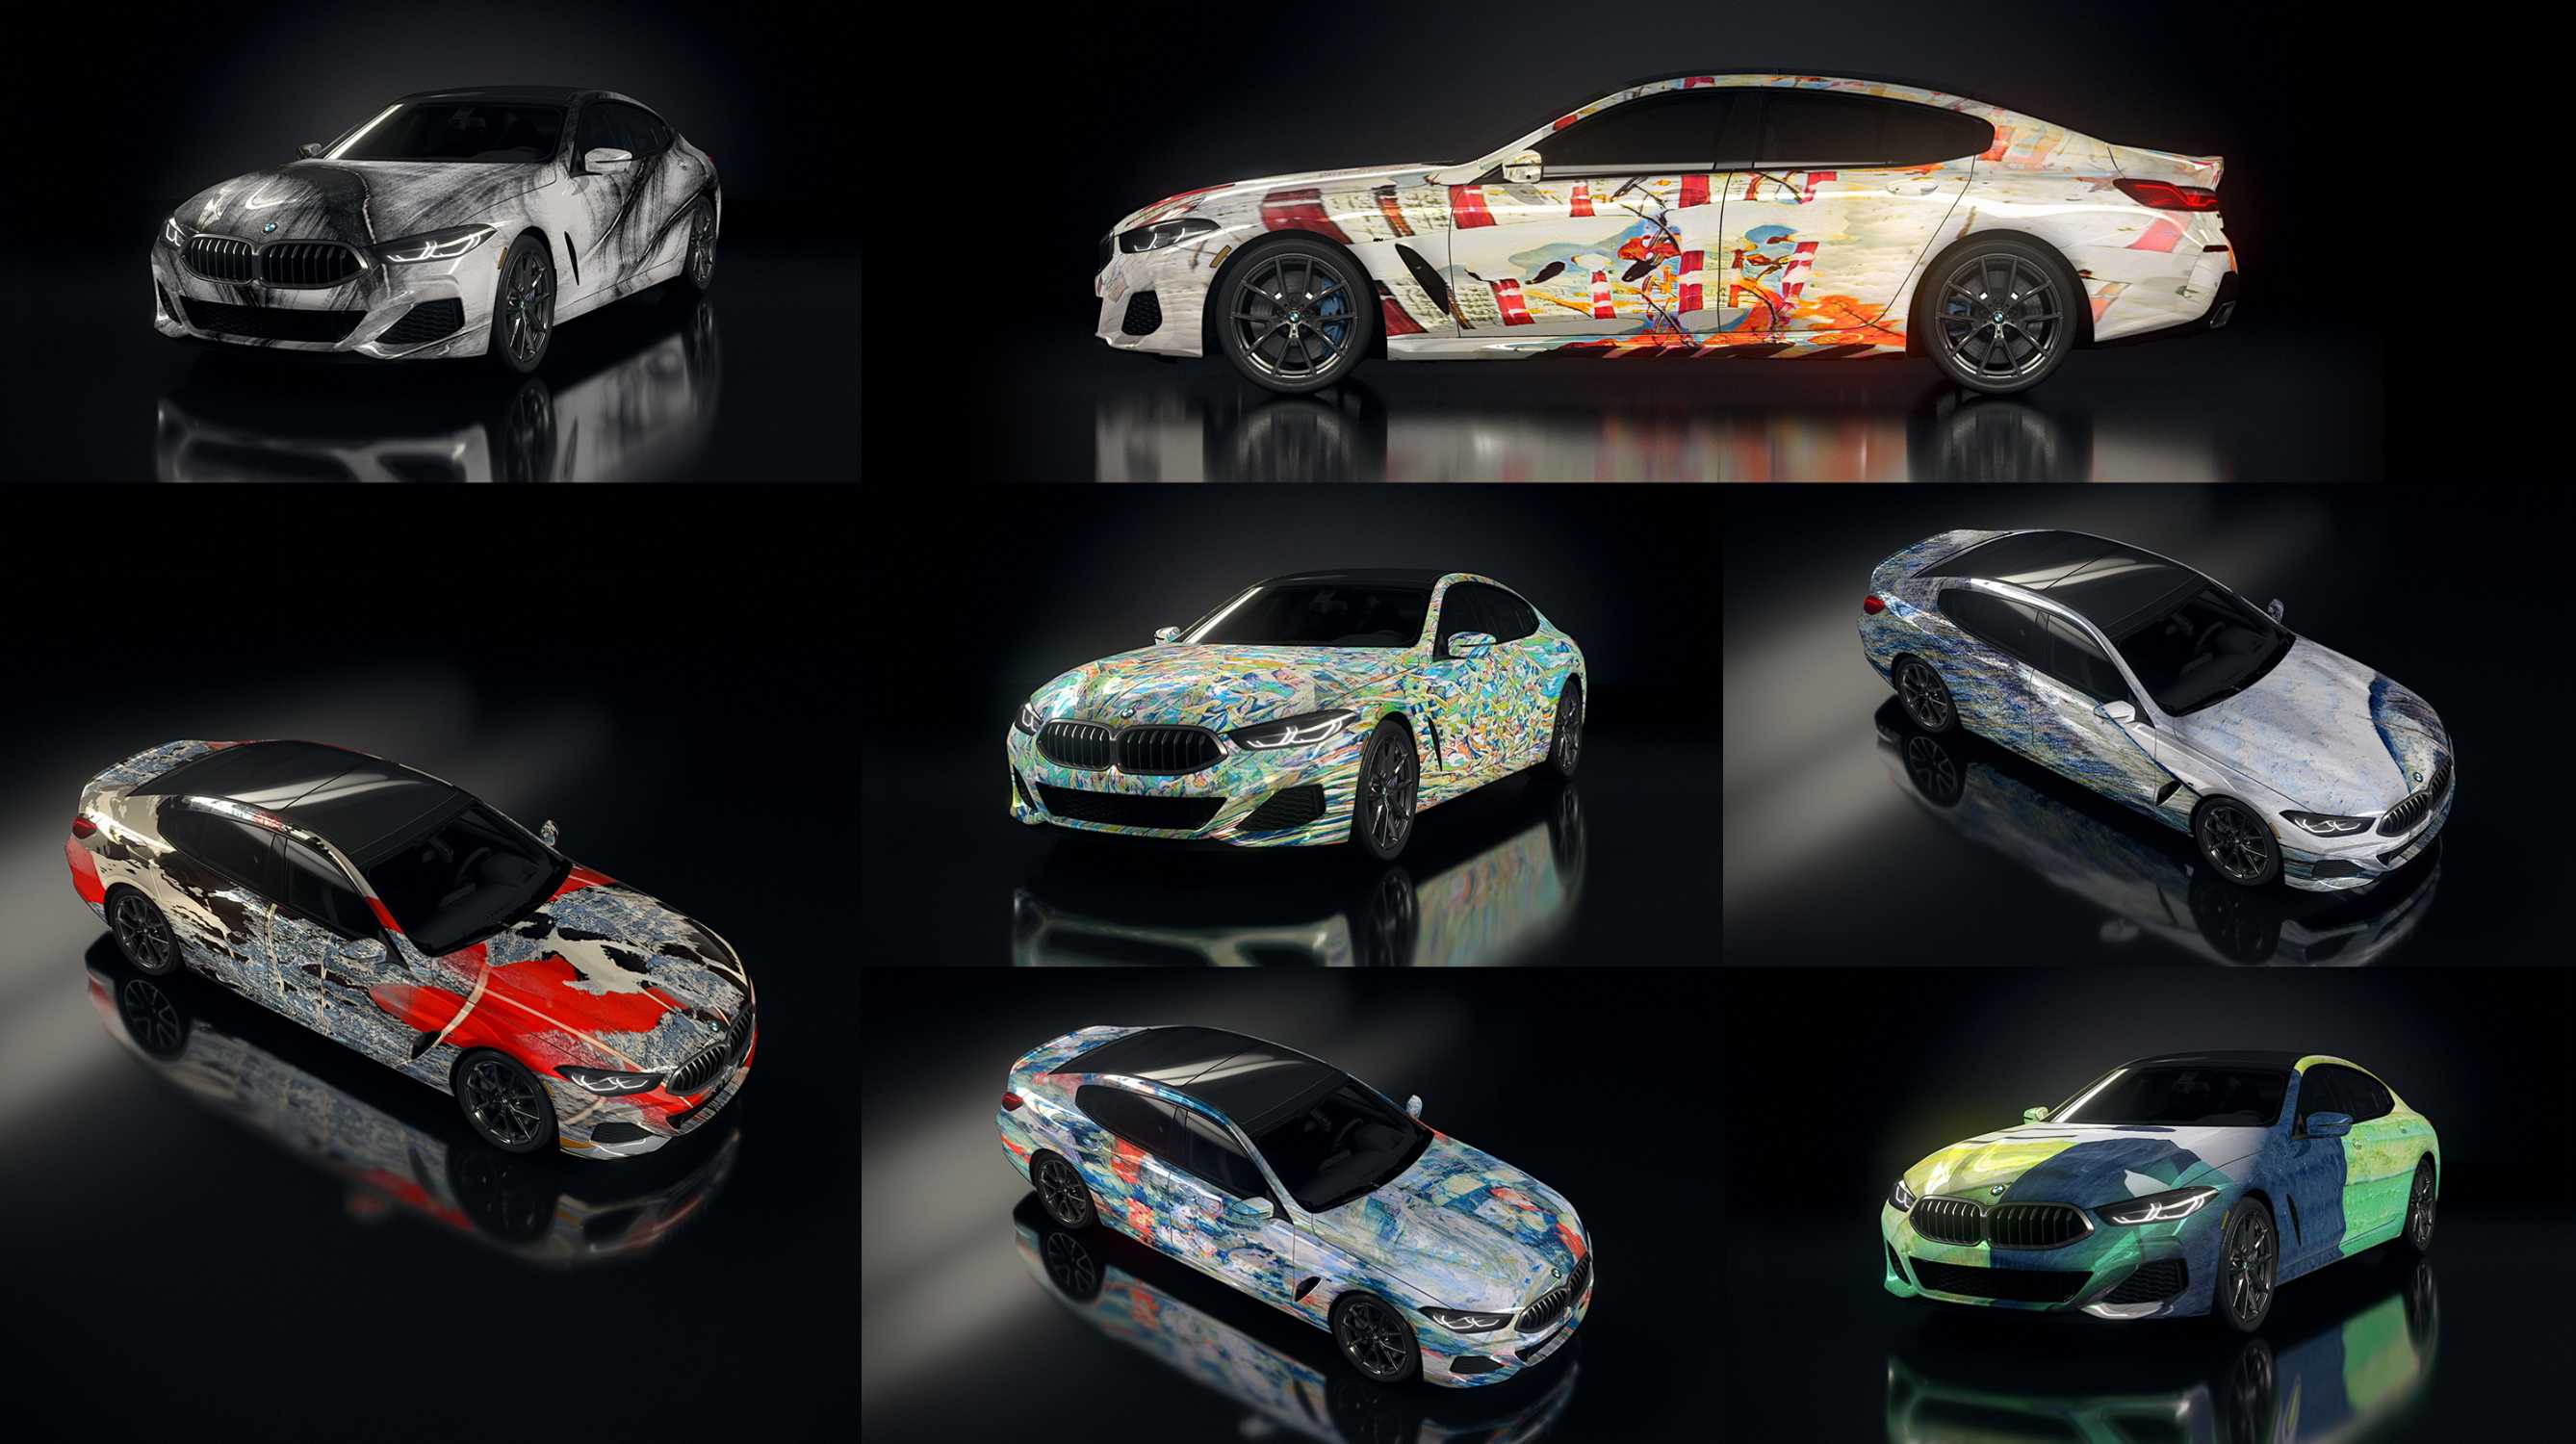 The Ultimate AI Masterpiece, An Art and AI Exploration by BMW, inspired by Lee Bae, a mix of selected artists, Jamal Cyrus, Hugo McCloud, the history of art, Kyungah Ham und Leelee Chan (clockwise, starting from top left), 2021. © BMW AG (05/2021)